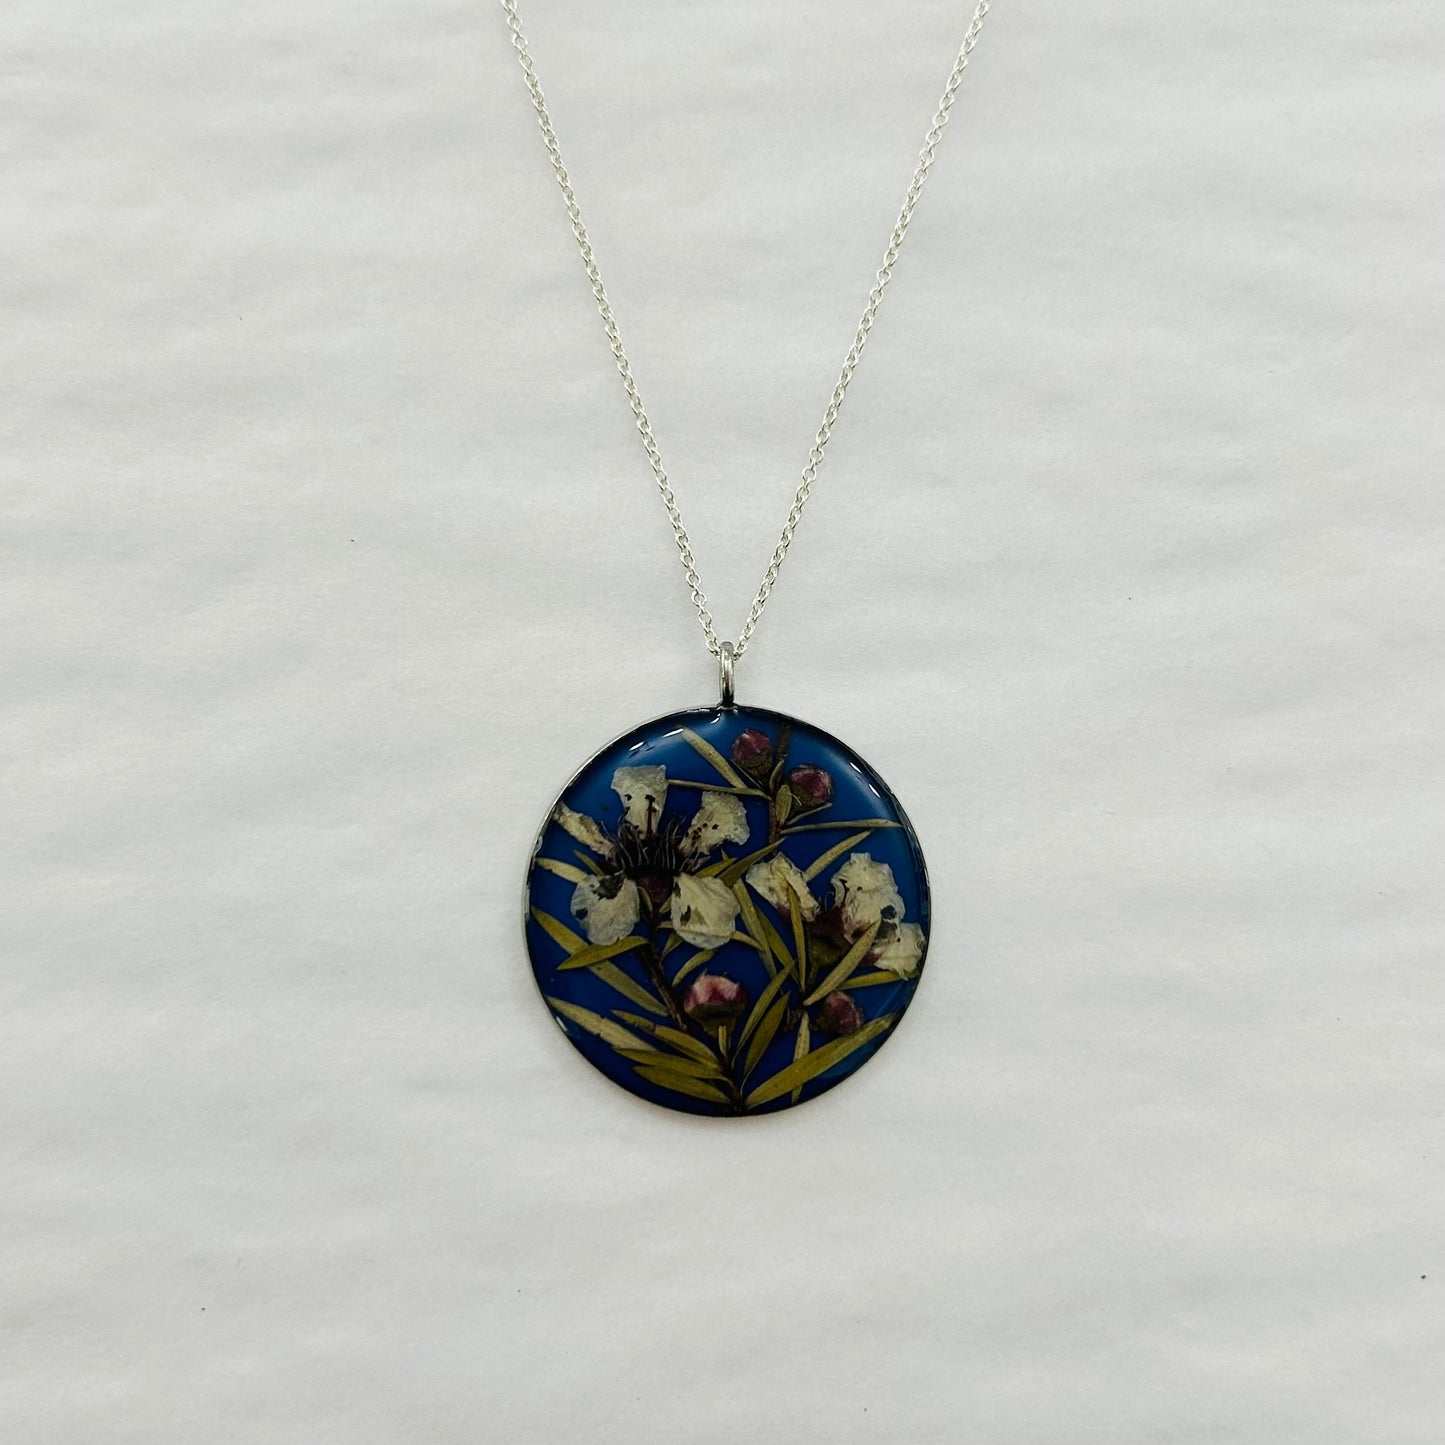 Flowers In Your Hair - Large Pendant Necklace Dark Blue Wildflowers